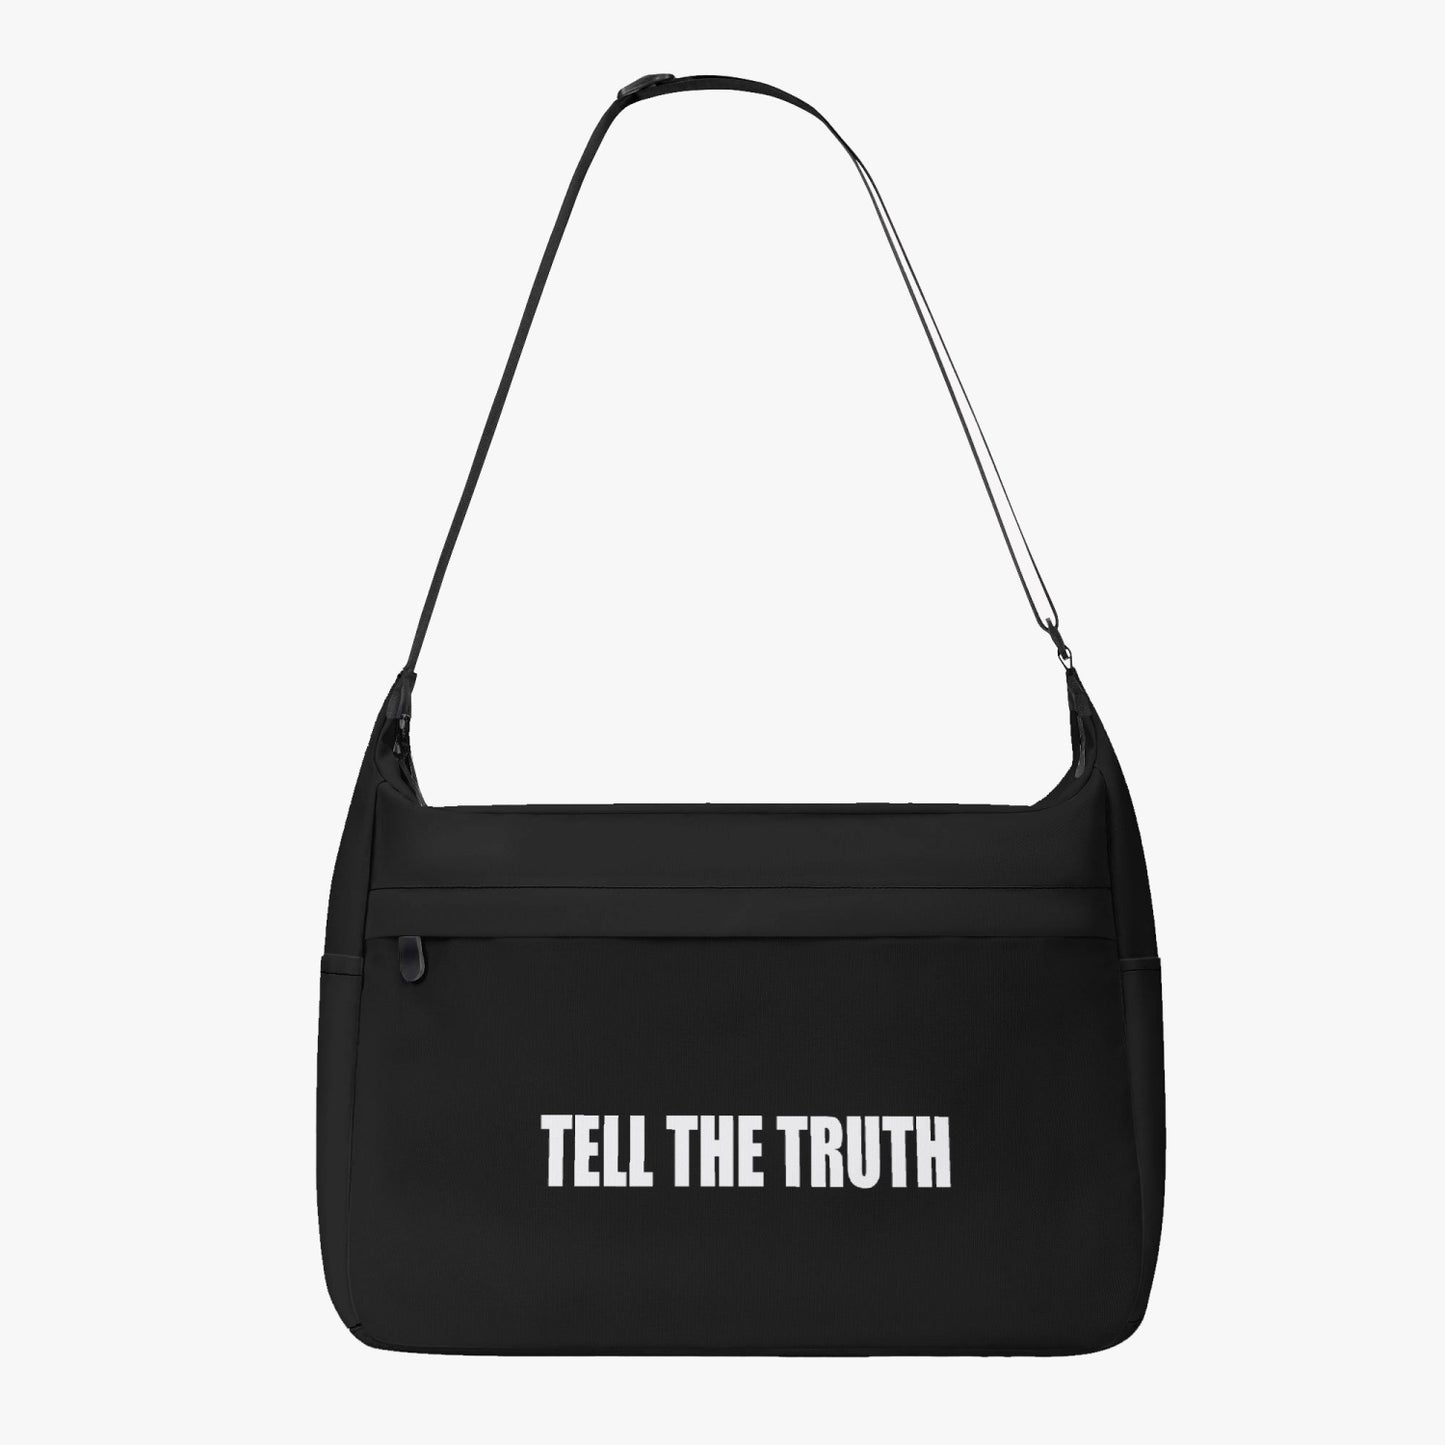 TELL THE TRUTH NEW MESSAGER BAG